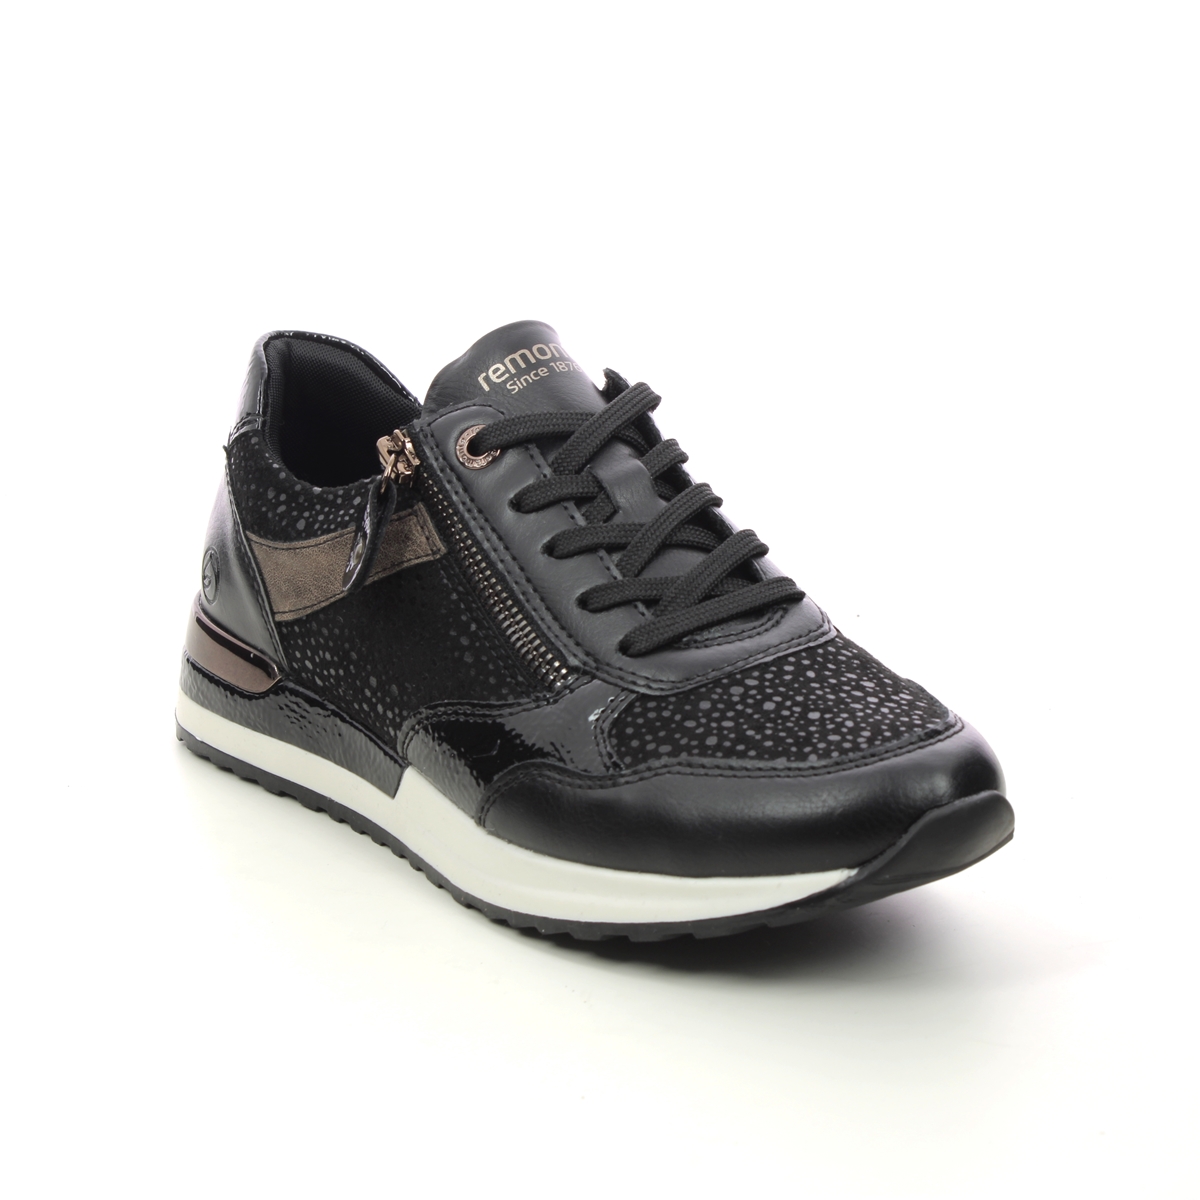 Remonte Vapour Lulea Black Womens Trainers R2548-01 In Size 39 In Plain Black